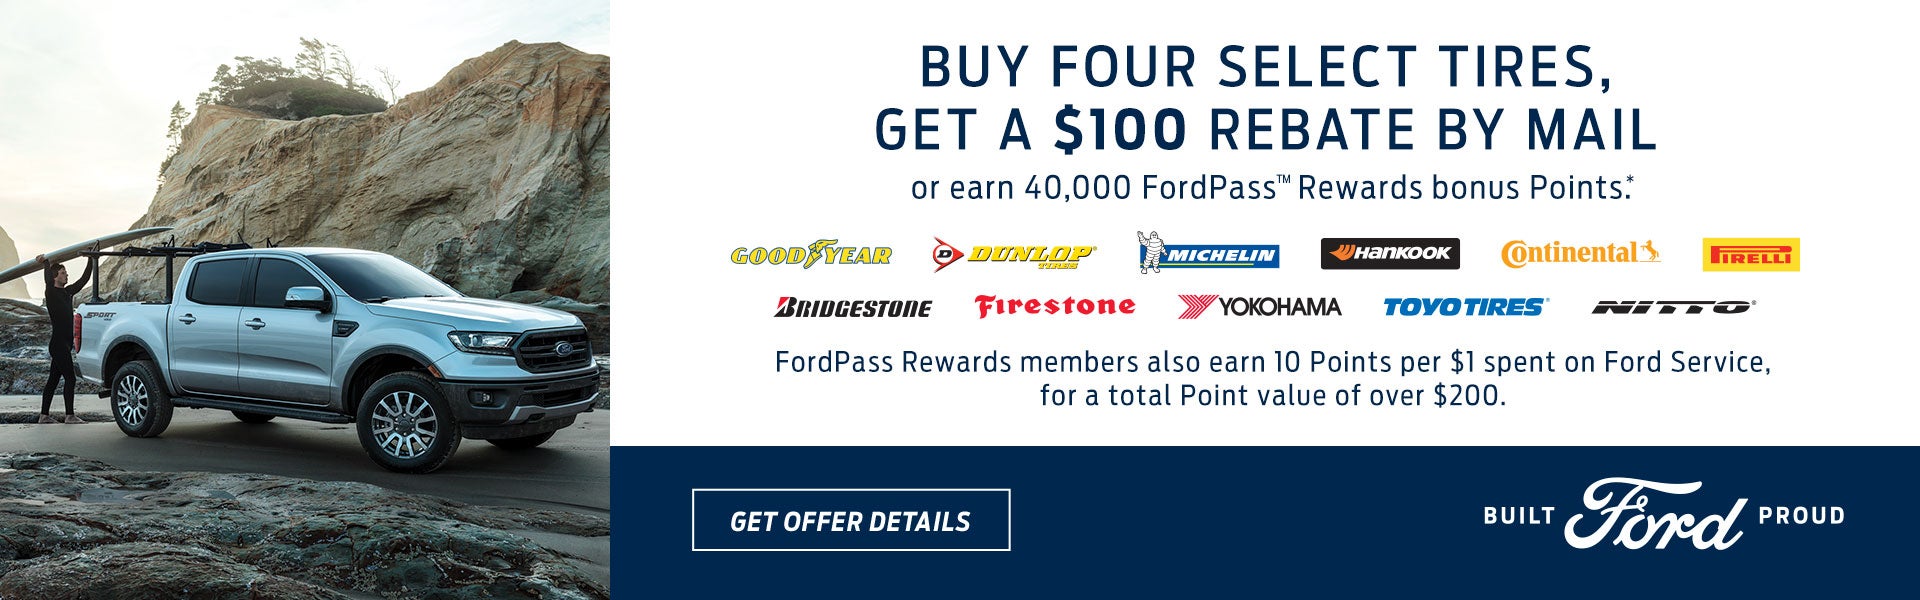 Buy four select tires, get a $70 rebate by mail. Click to print this offer.